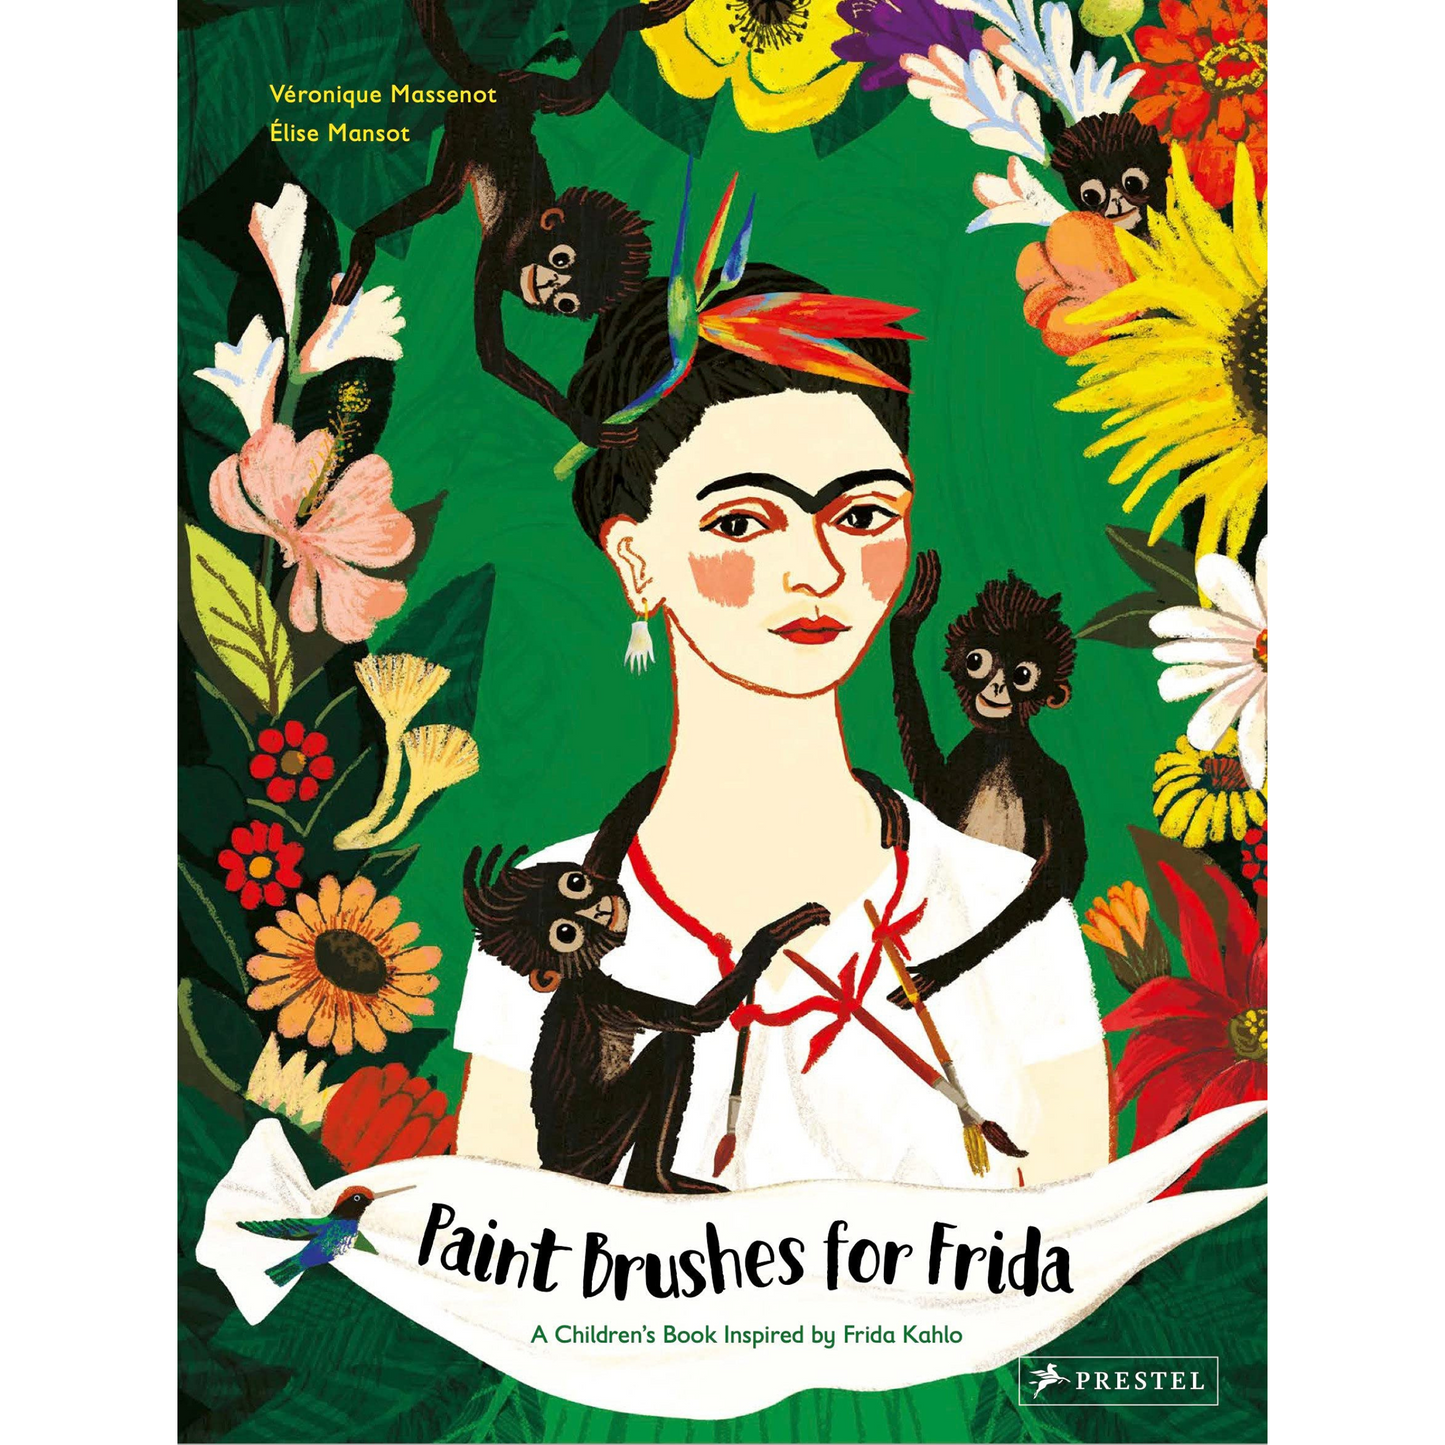 Paint Brushes for Frida book front cover with an image of Frida Kahlo surrounded by flowers and monkeys.